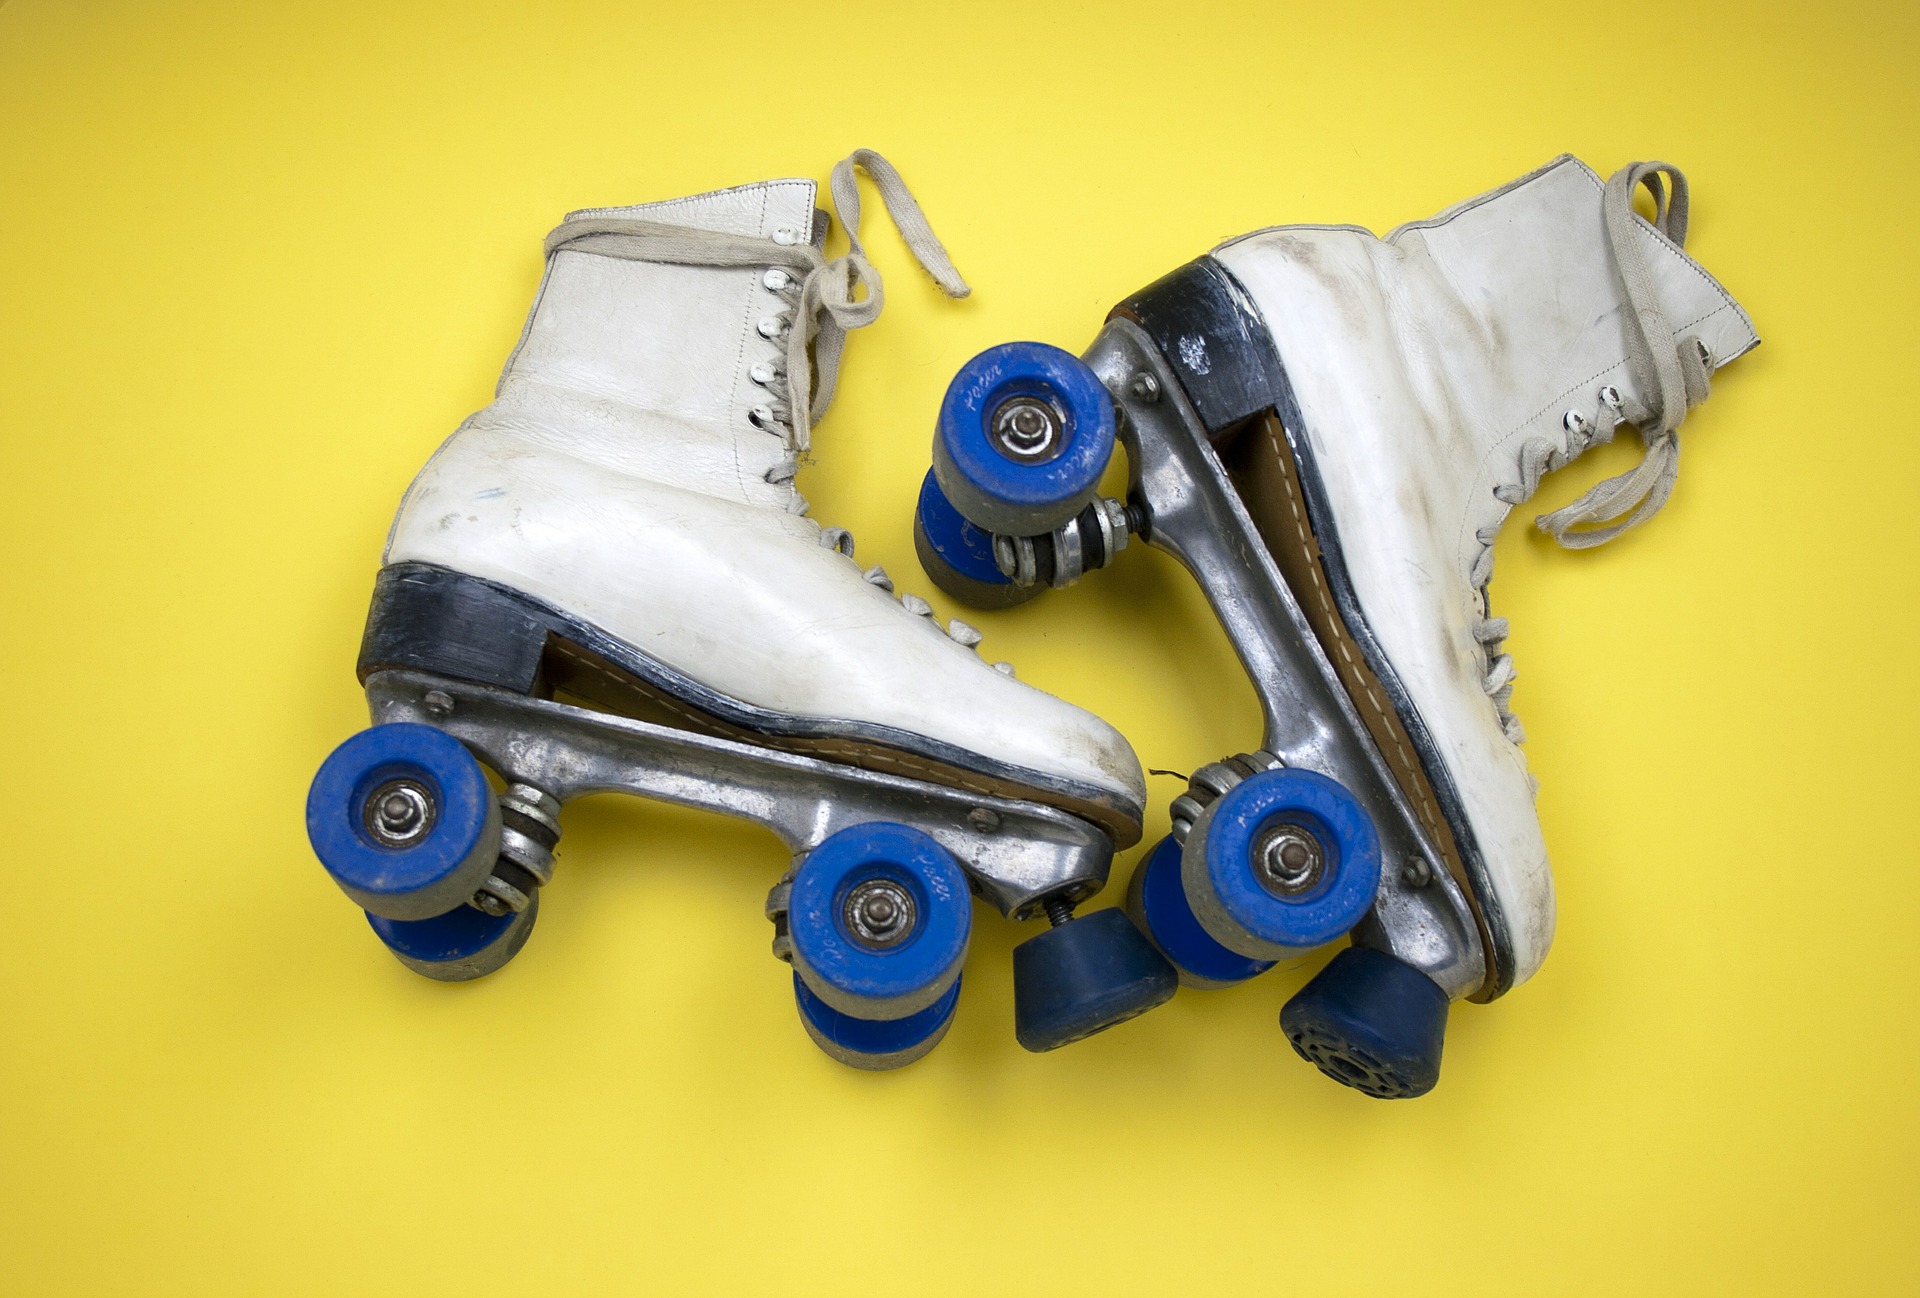 Alberta’s only roller rink set to open this week